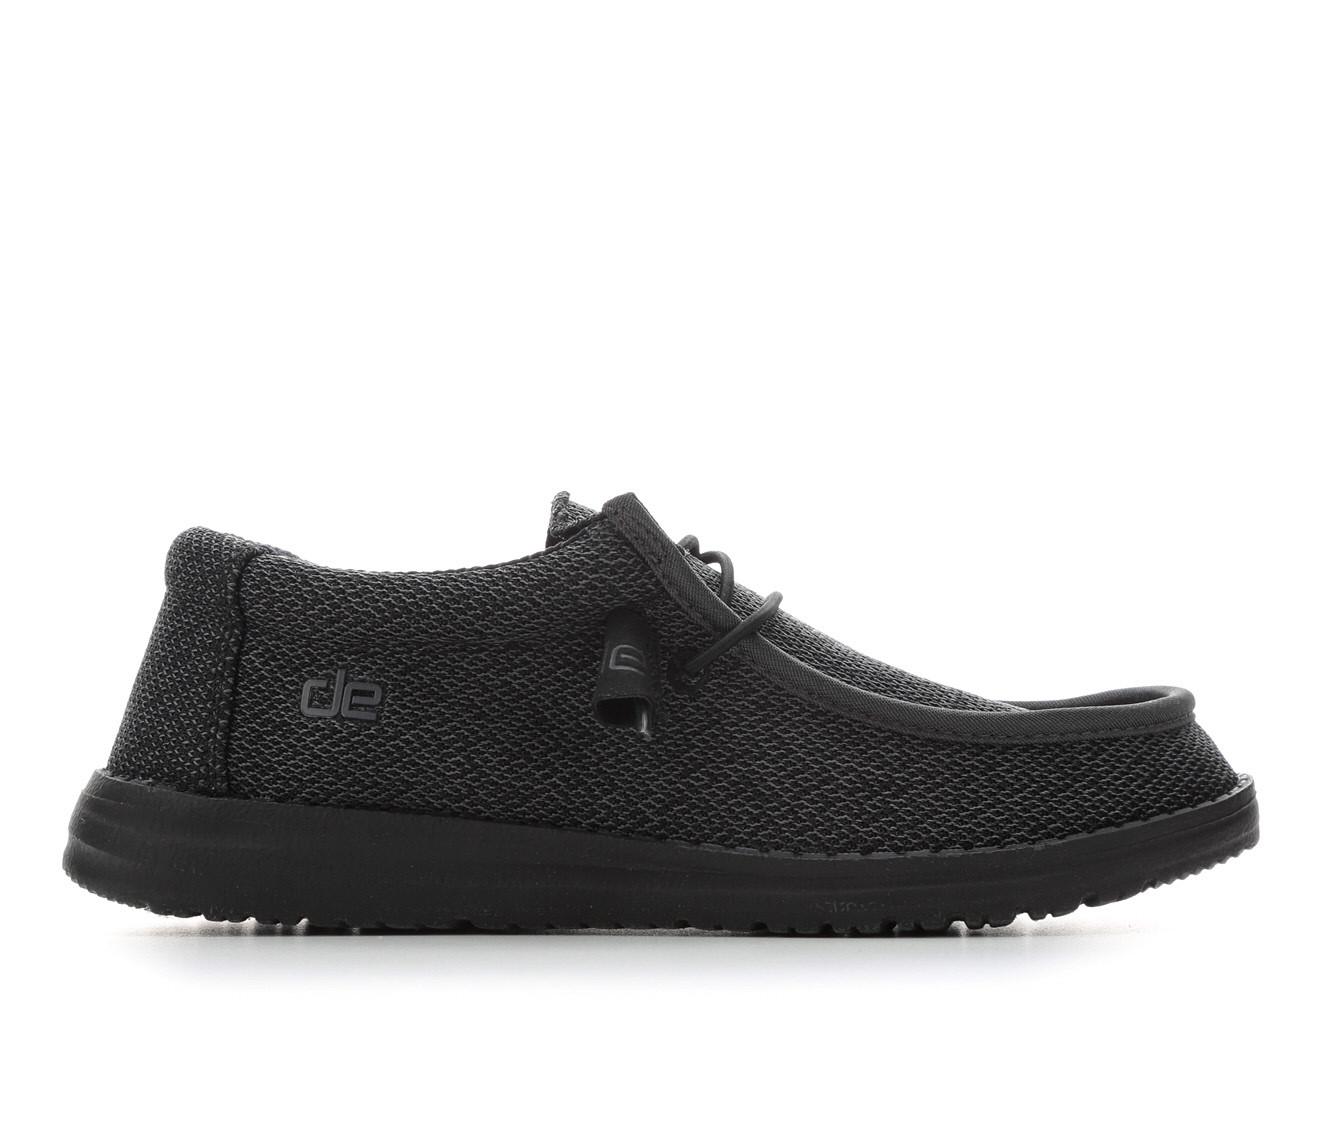  Hey Dude Wally Sport Mesh Black/Black Size 8, Men's Shoes, Men's Slip On Loafers, Comfortable & Light Weight